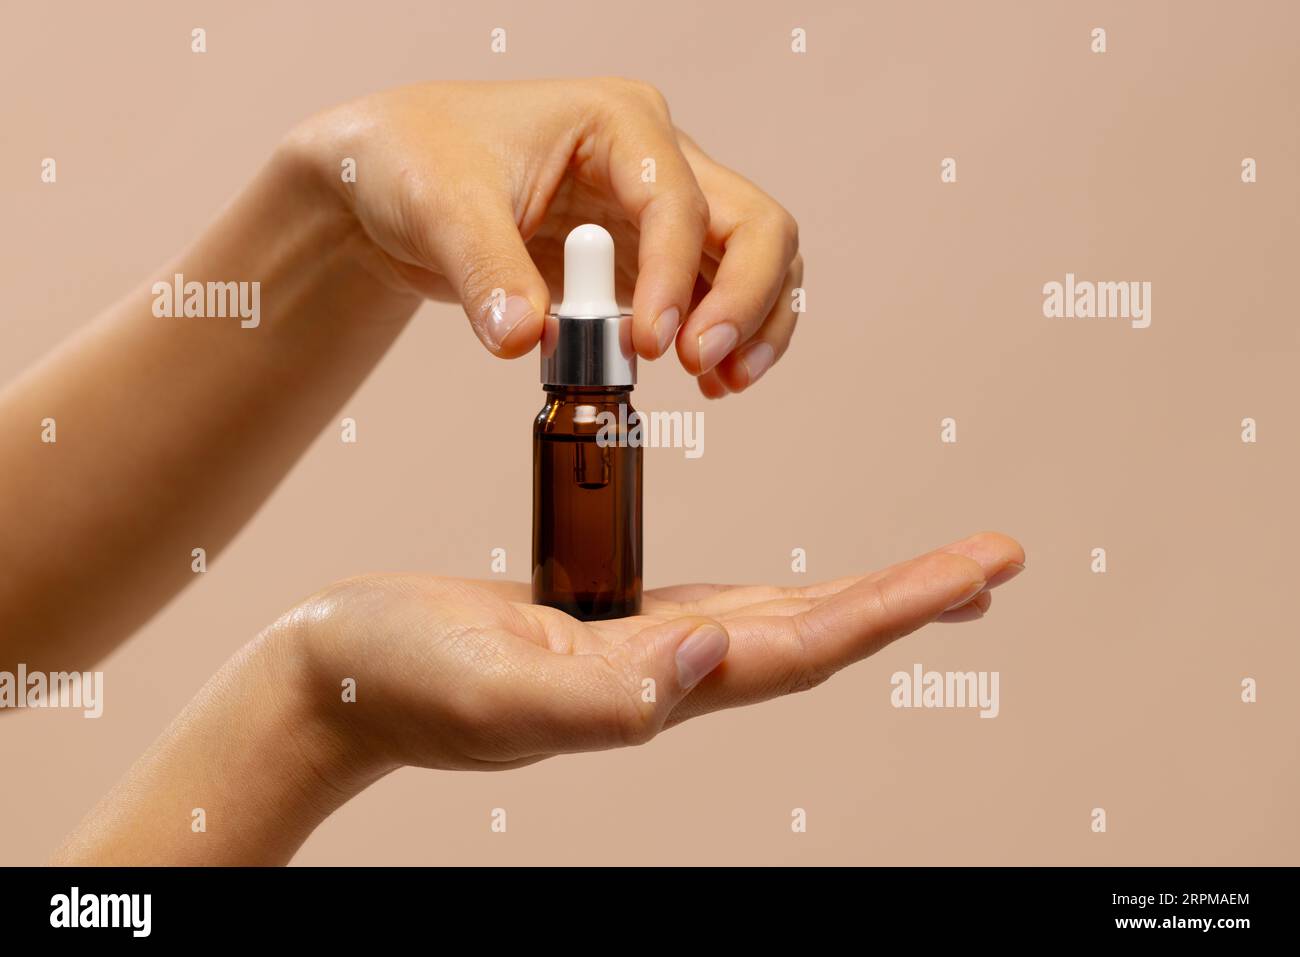 Hands of asian woman holding dropper bottle of skin tonic with copy space Stock Photo